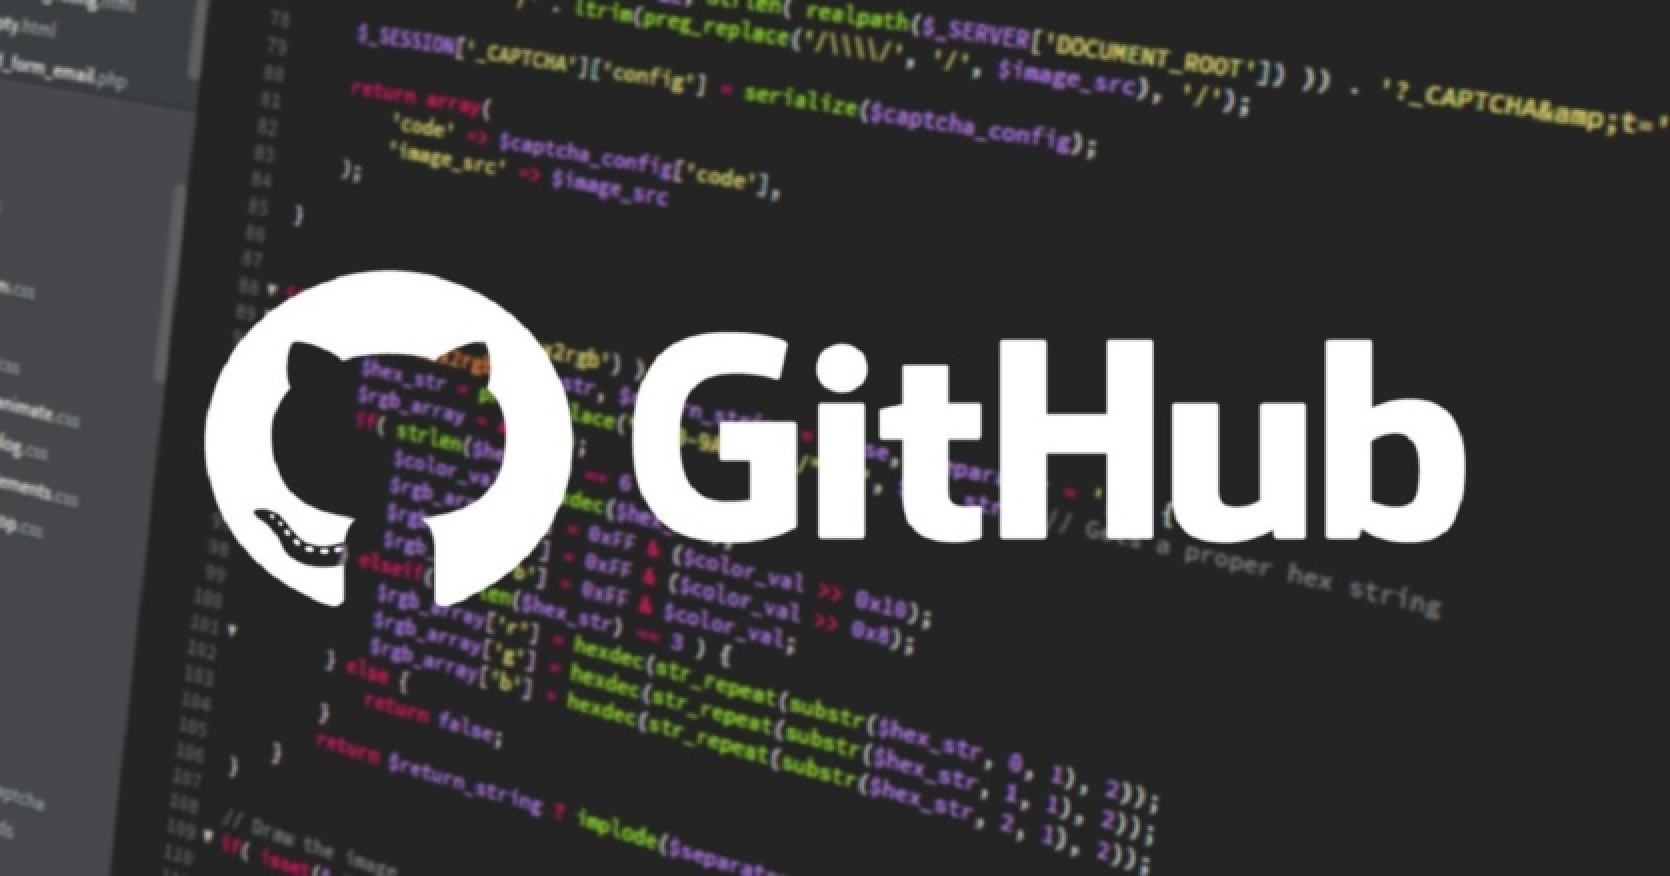 GitHub has launched a new AI tool and can now self-patch vulnerabilities in code